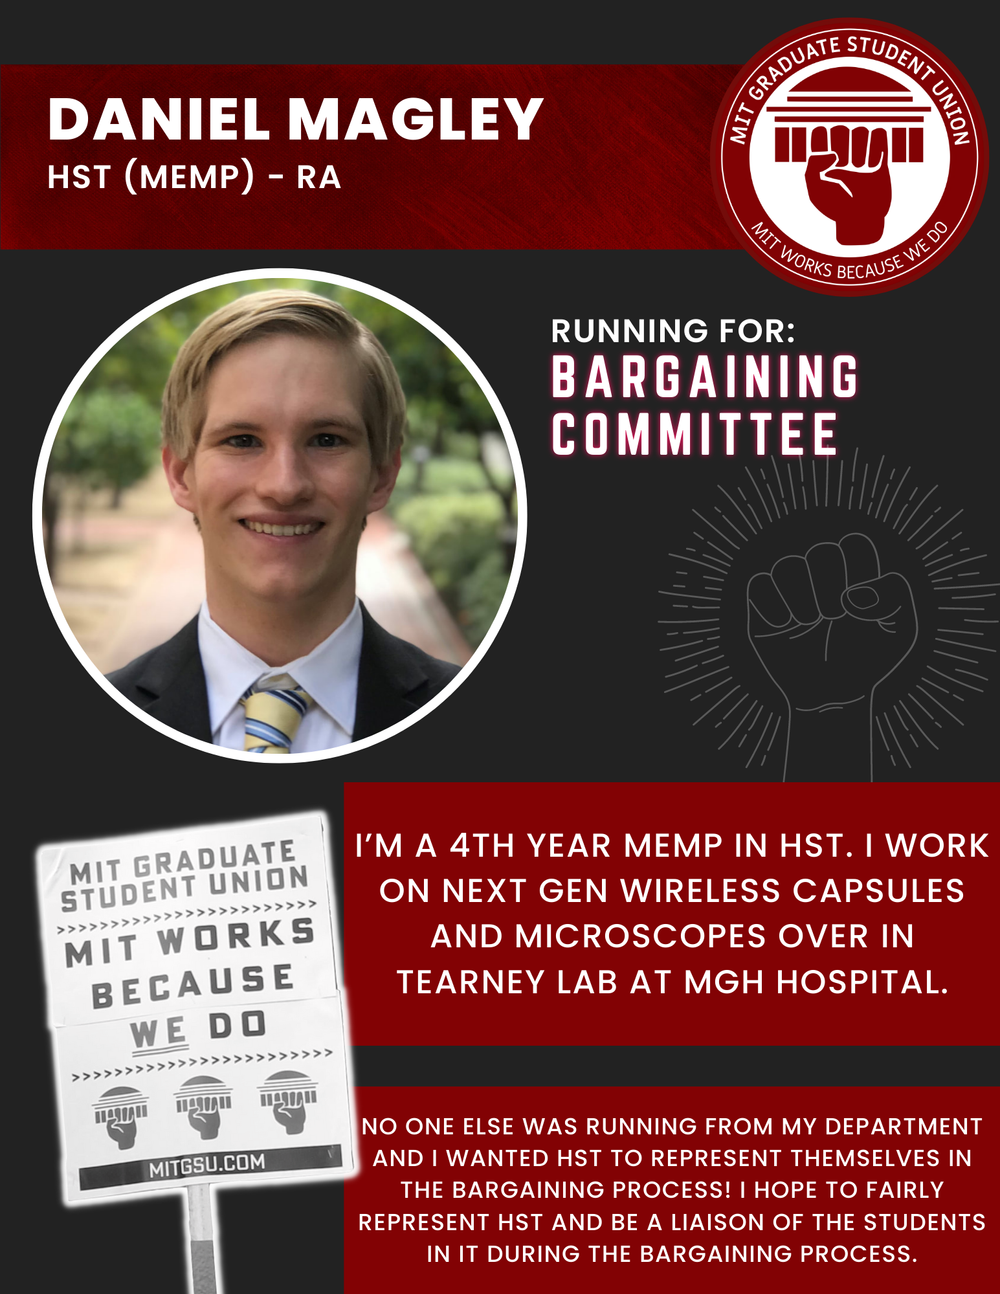  DANIEL MAGLEY HST (MEMP) - RA   RUNNING FOR: Bargaining Committee  I’M A 4TH YEAR MEMP IN HST. I WORK ON NEXT GEN WIRELESS CAPSULES AND MICROSCOPES OVER IN TEARNEY LAB AT MGH HOSPITAL.  NO ONE ELSE WAS RUNNING FROM MY DEPARTMENT AND I WANTED HST TO 